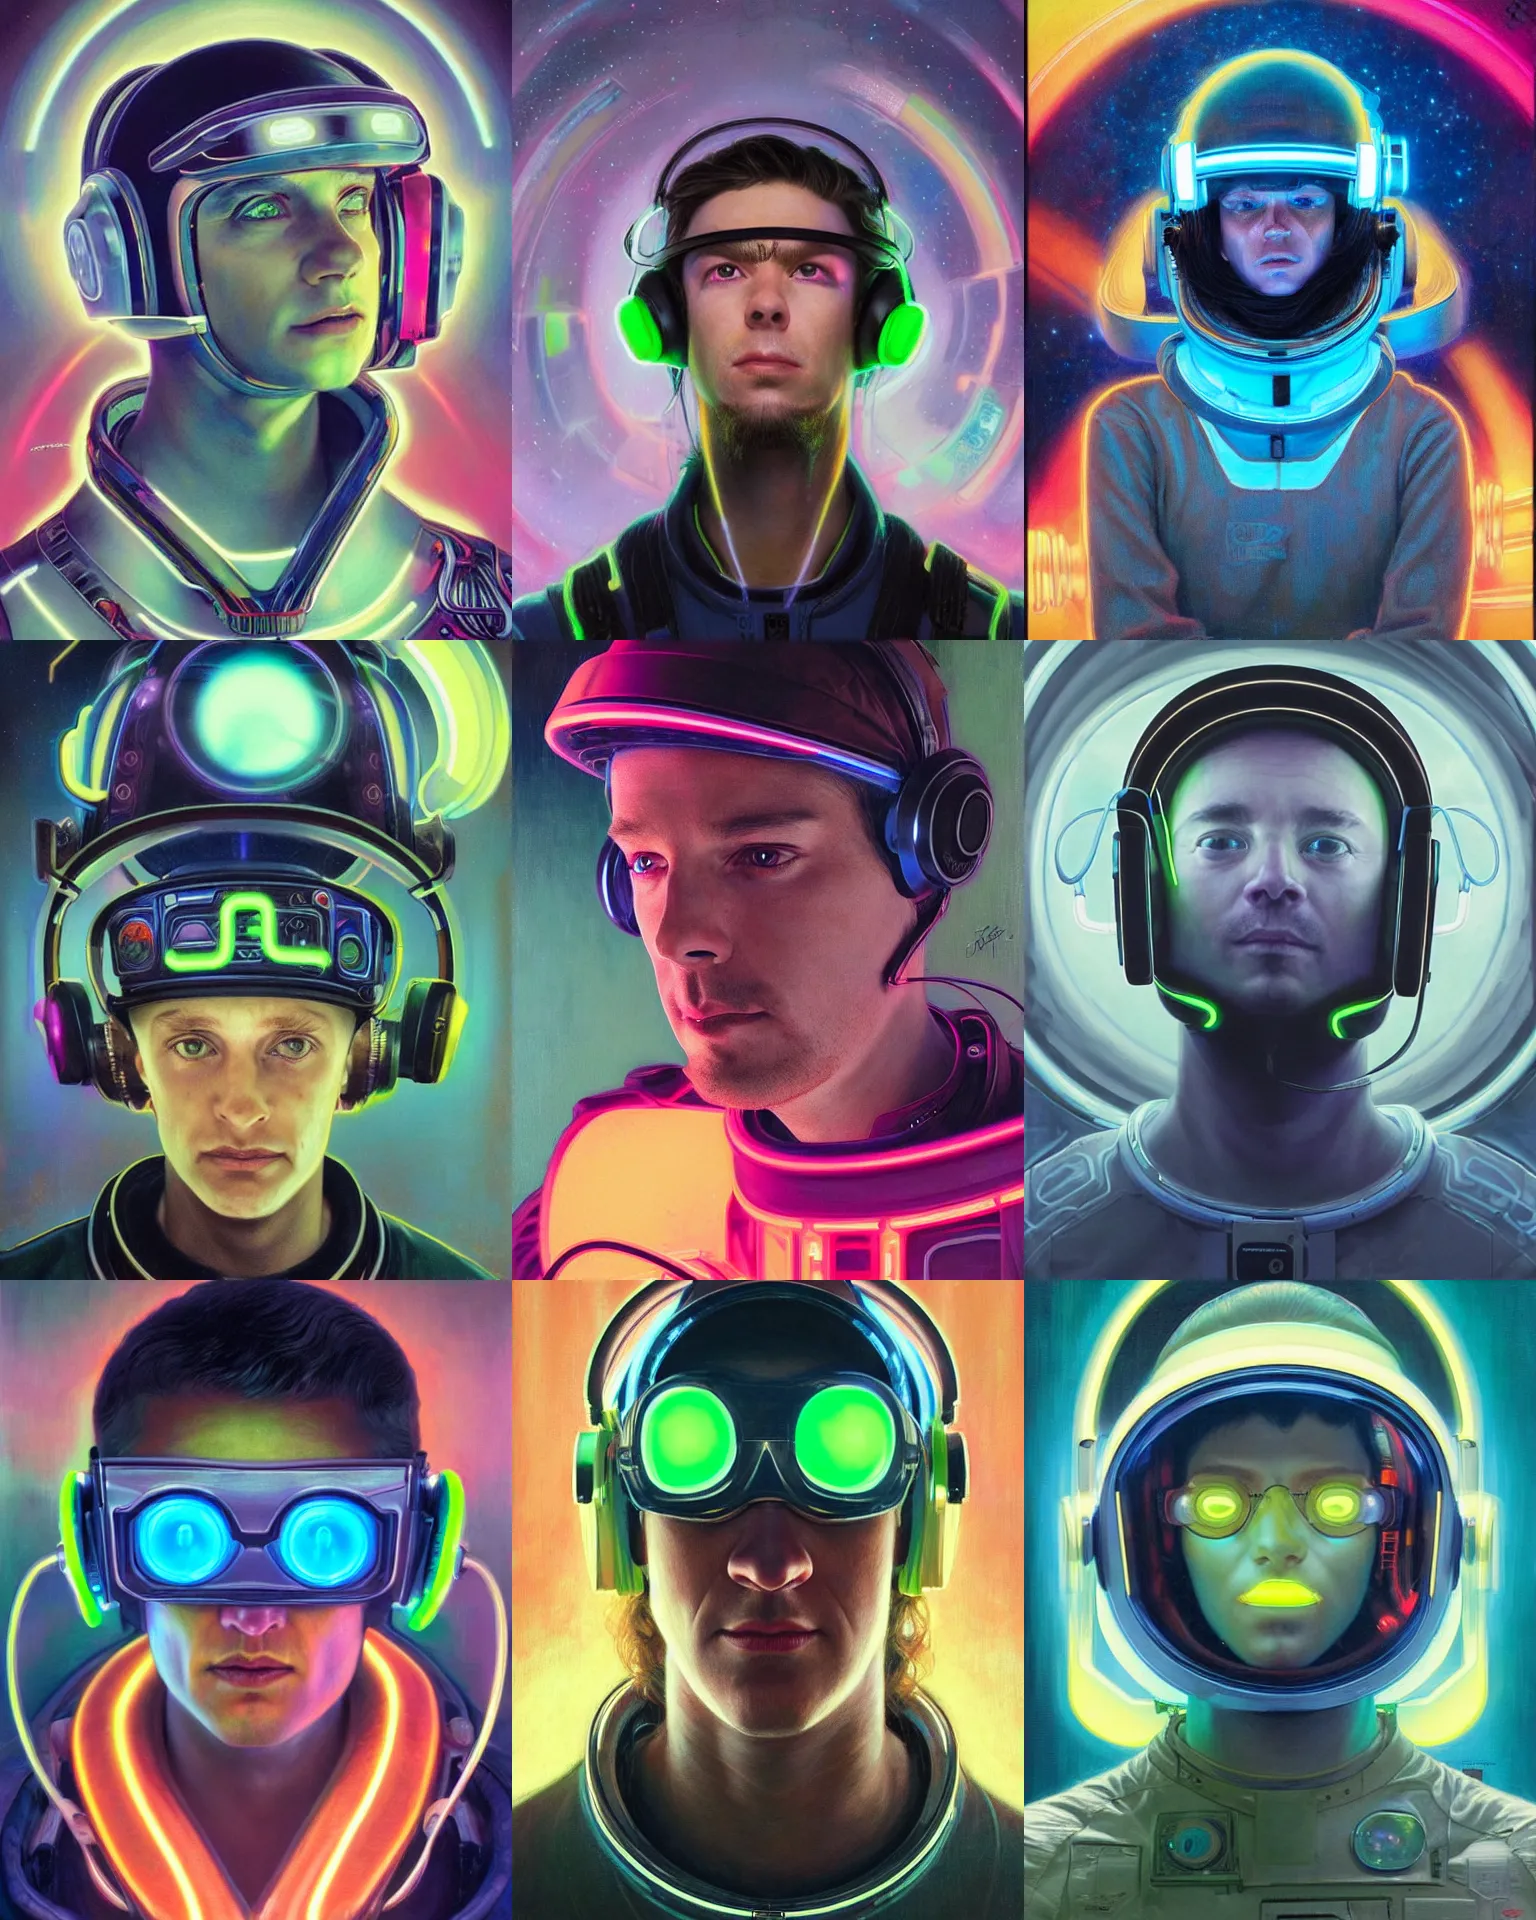 Prompt: future coder looking on, glowing visor over eyes and sleek neon headphones, neon accents, desaturated headshot portrait painting by donato giancola, dean cornwall, rhads, edmund dulac, alex grey, alphonse mucha, astronaut cyberpunk electric fashion photography slight stubble